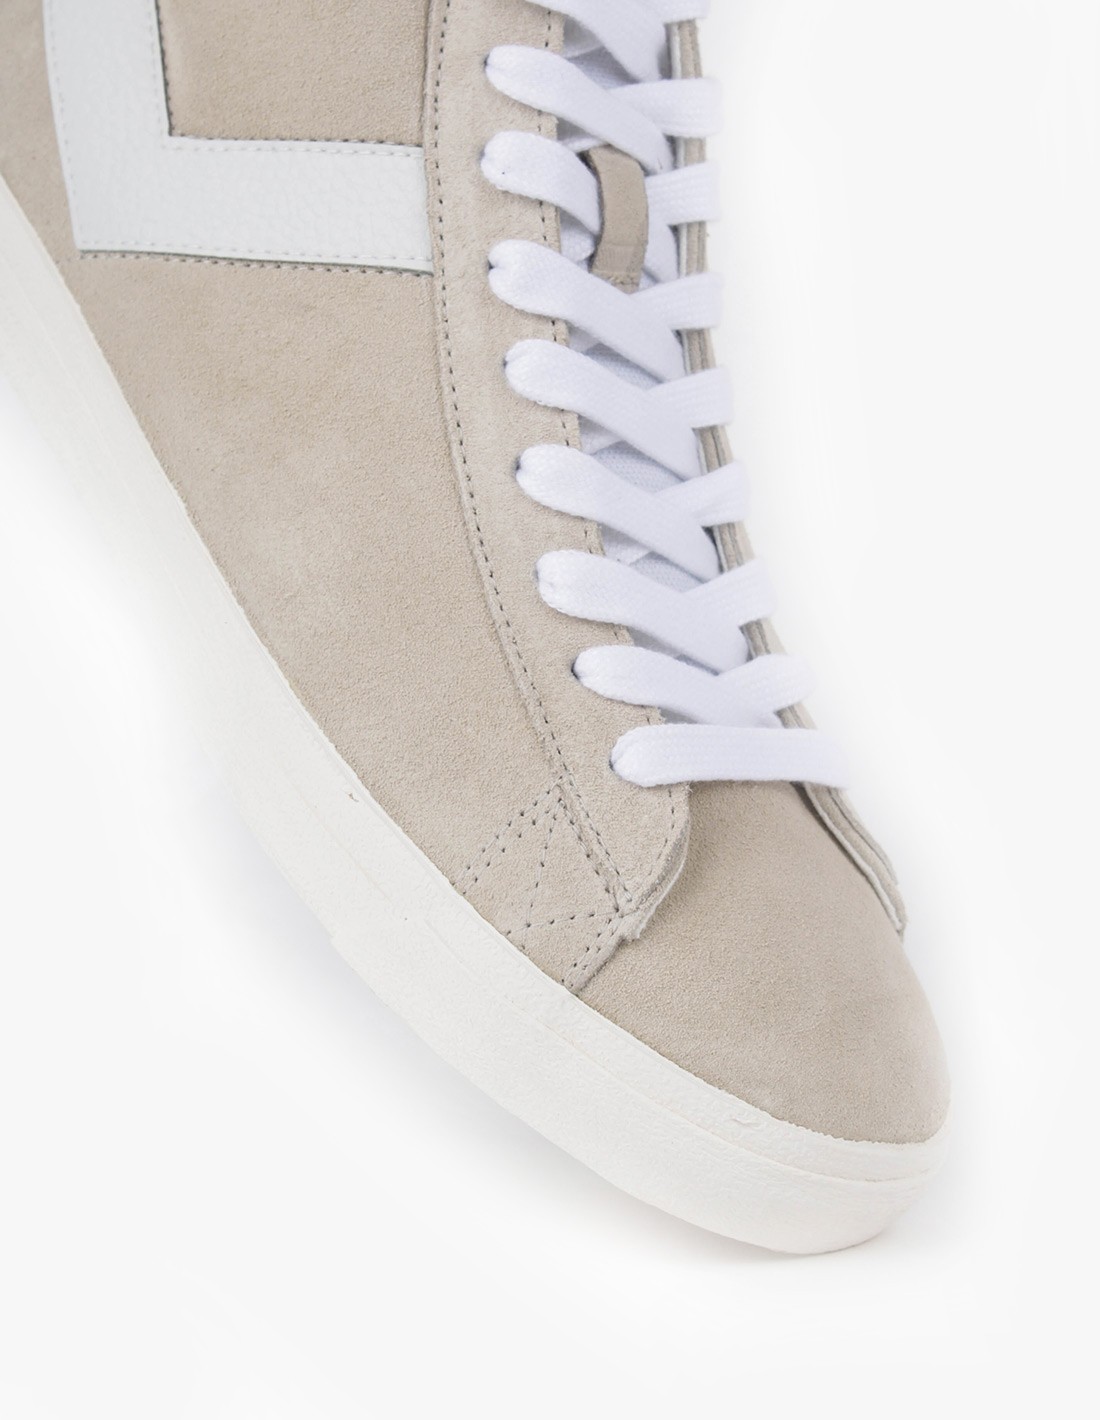 PONY Topstar Suede Hi in Off White